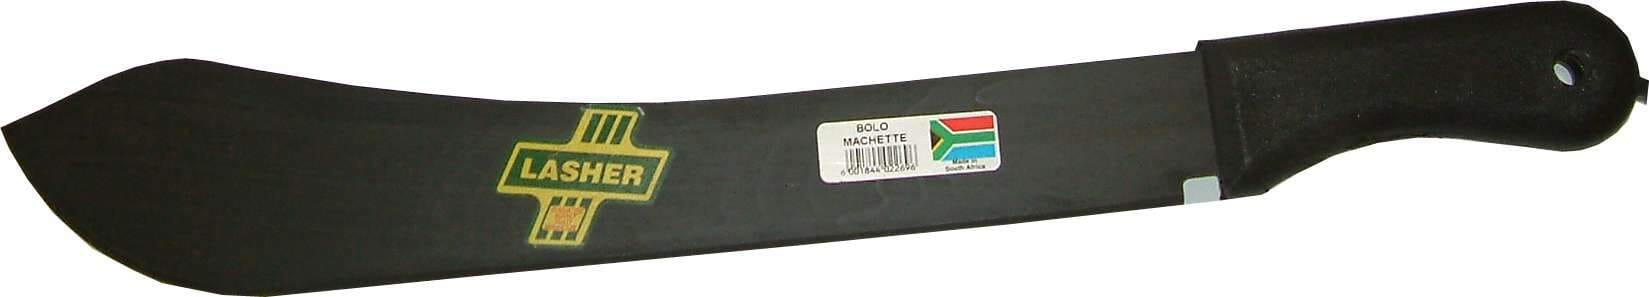 Lasher Machette Bullnose Ptn with Poly Handle FG02269